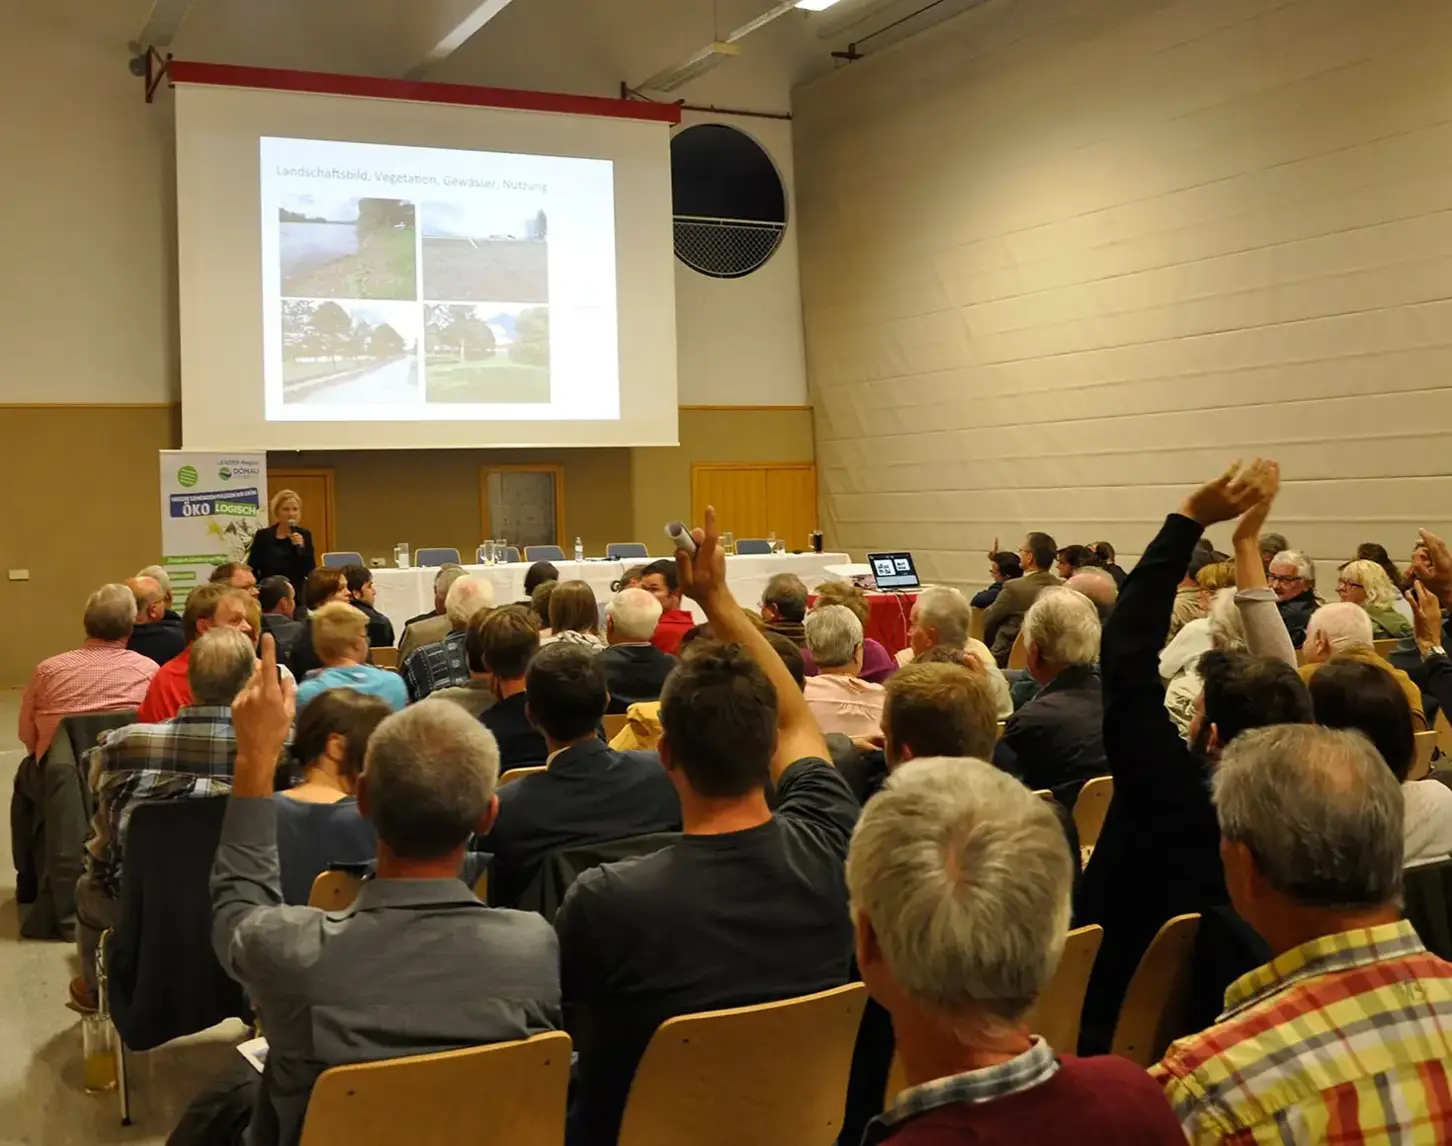 VERBUND officially presented the fish migration aid and oxbow lake project for the first time at a public event in the municipality of Kirchberg am Wagram.